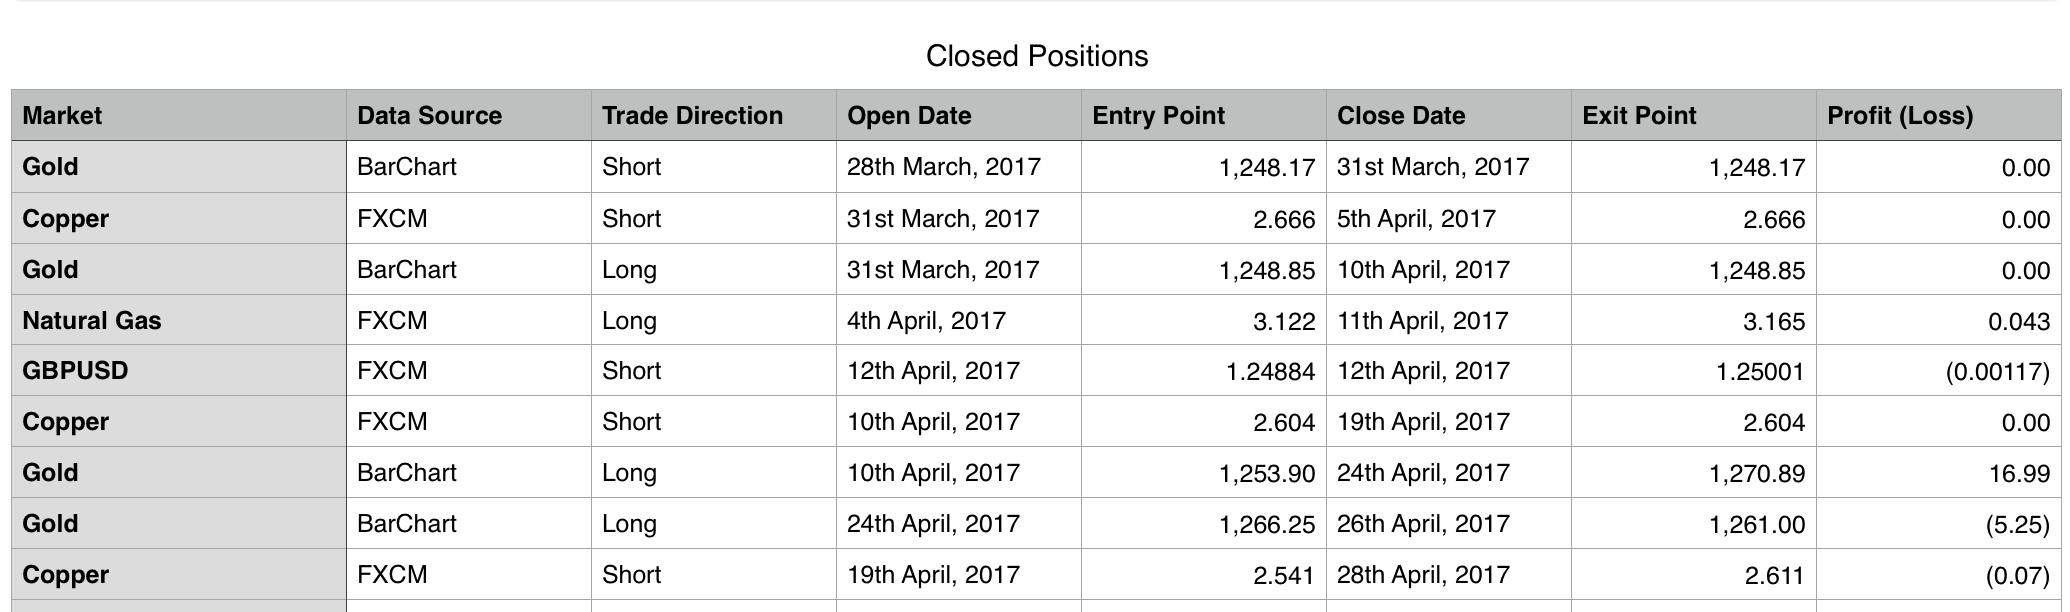 Trading Room Closed Positions March 2017